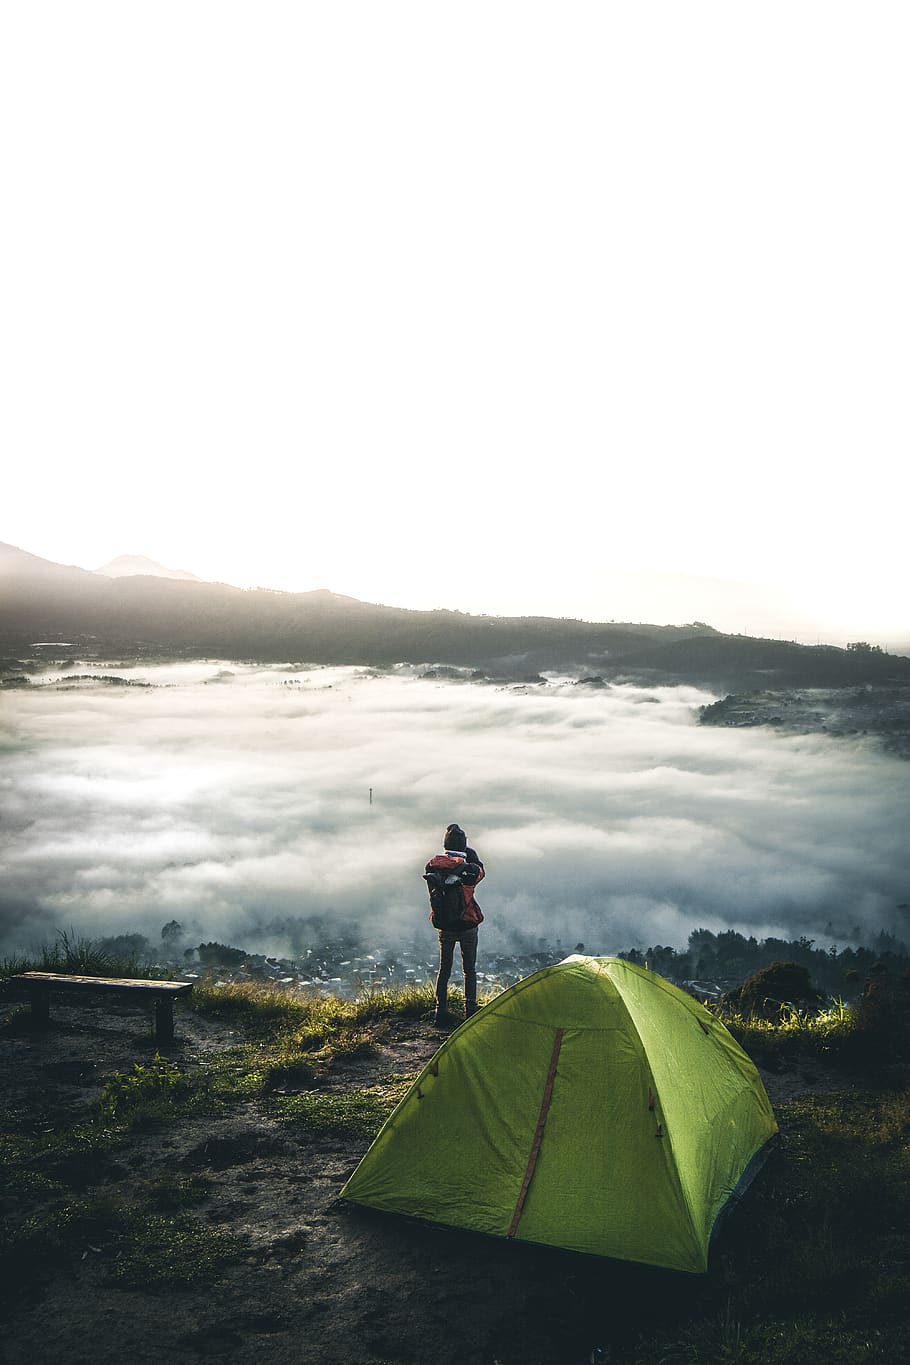 person standing beside tent overlooking white clouds, human, camping